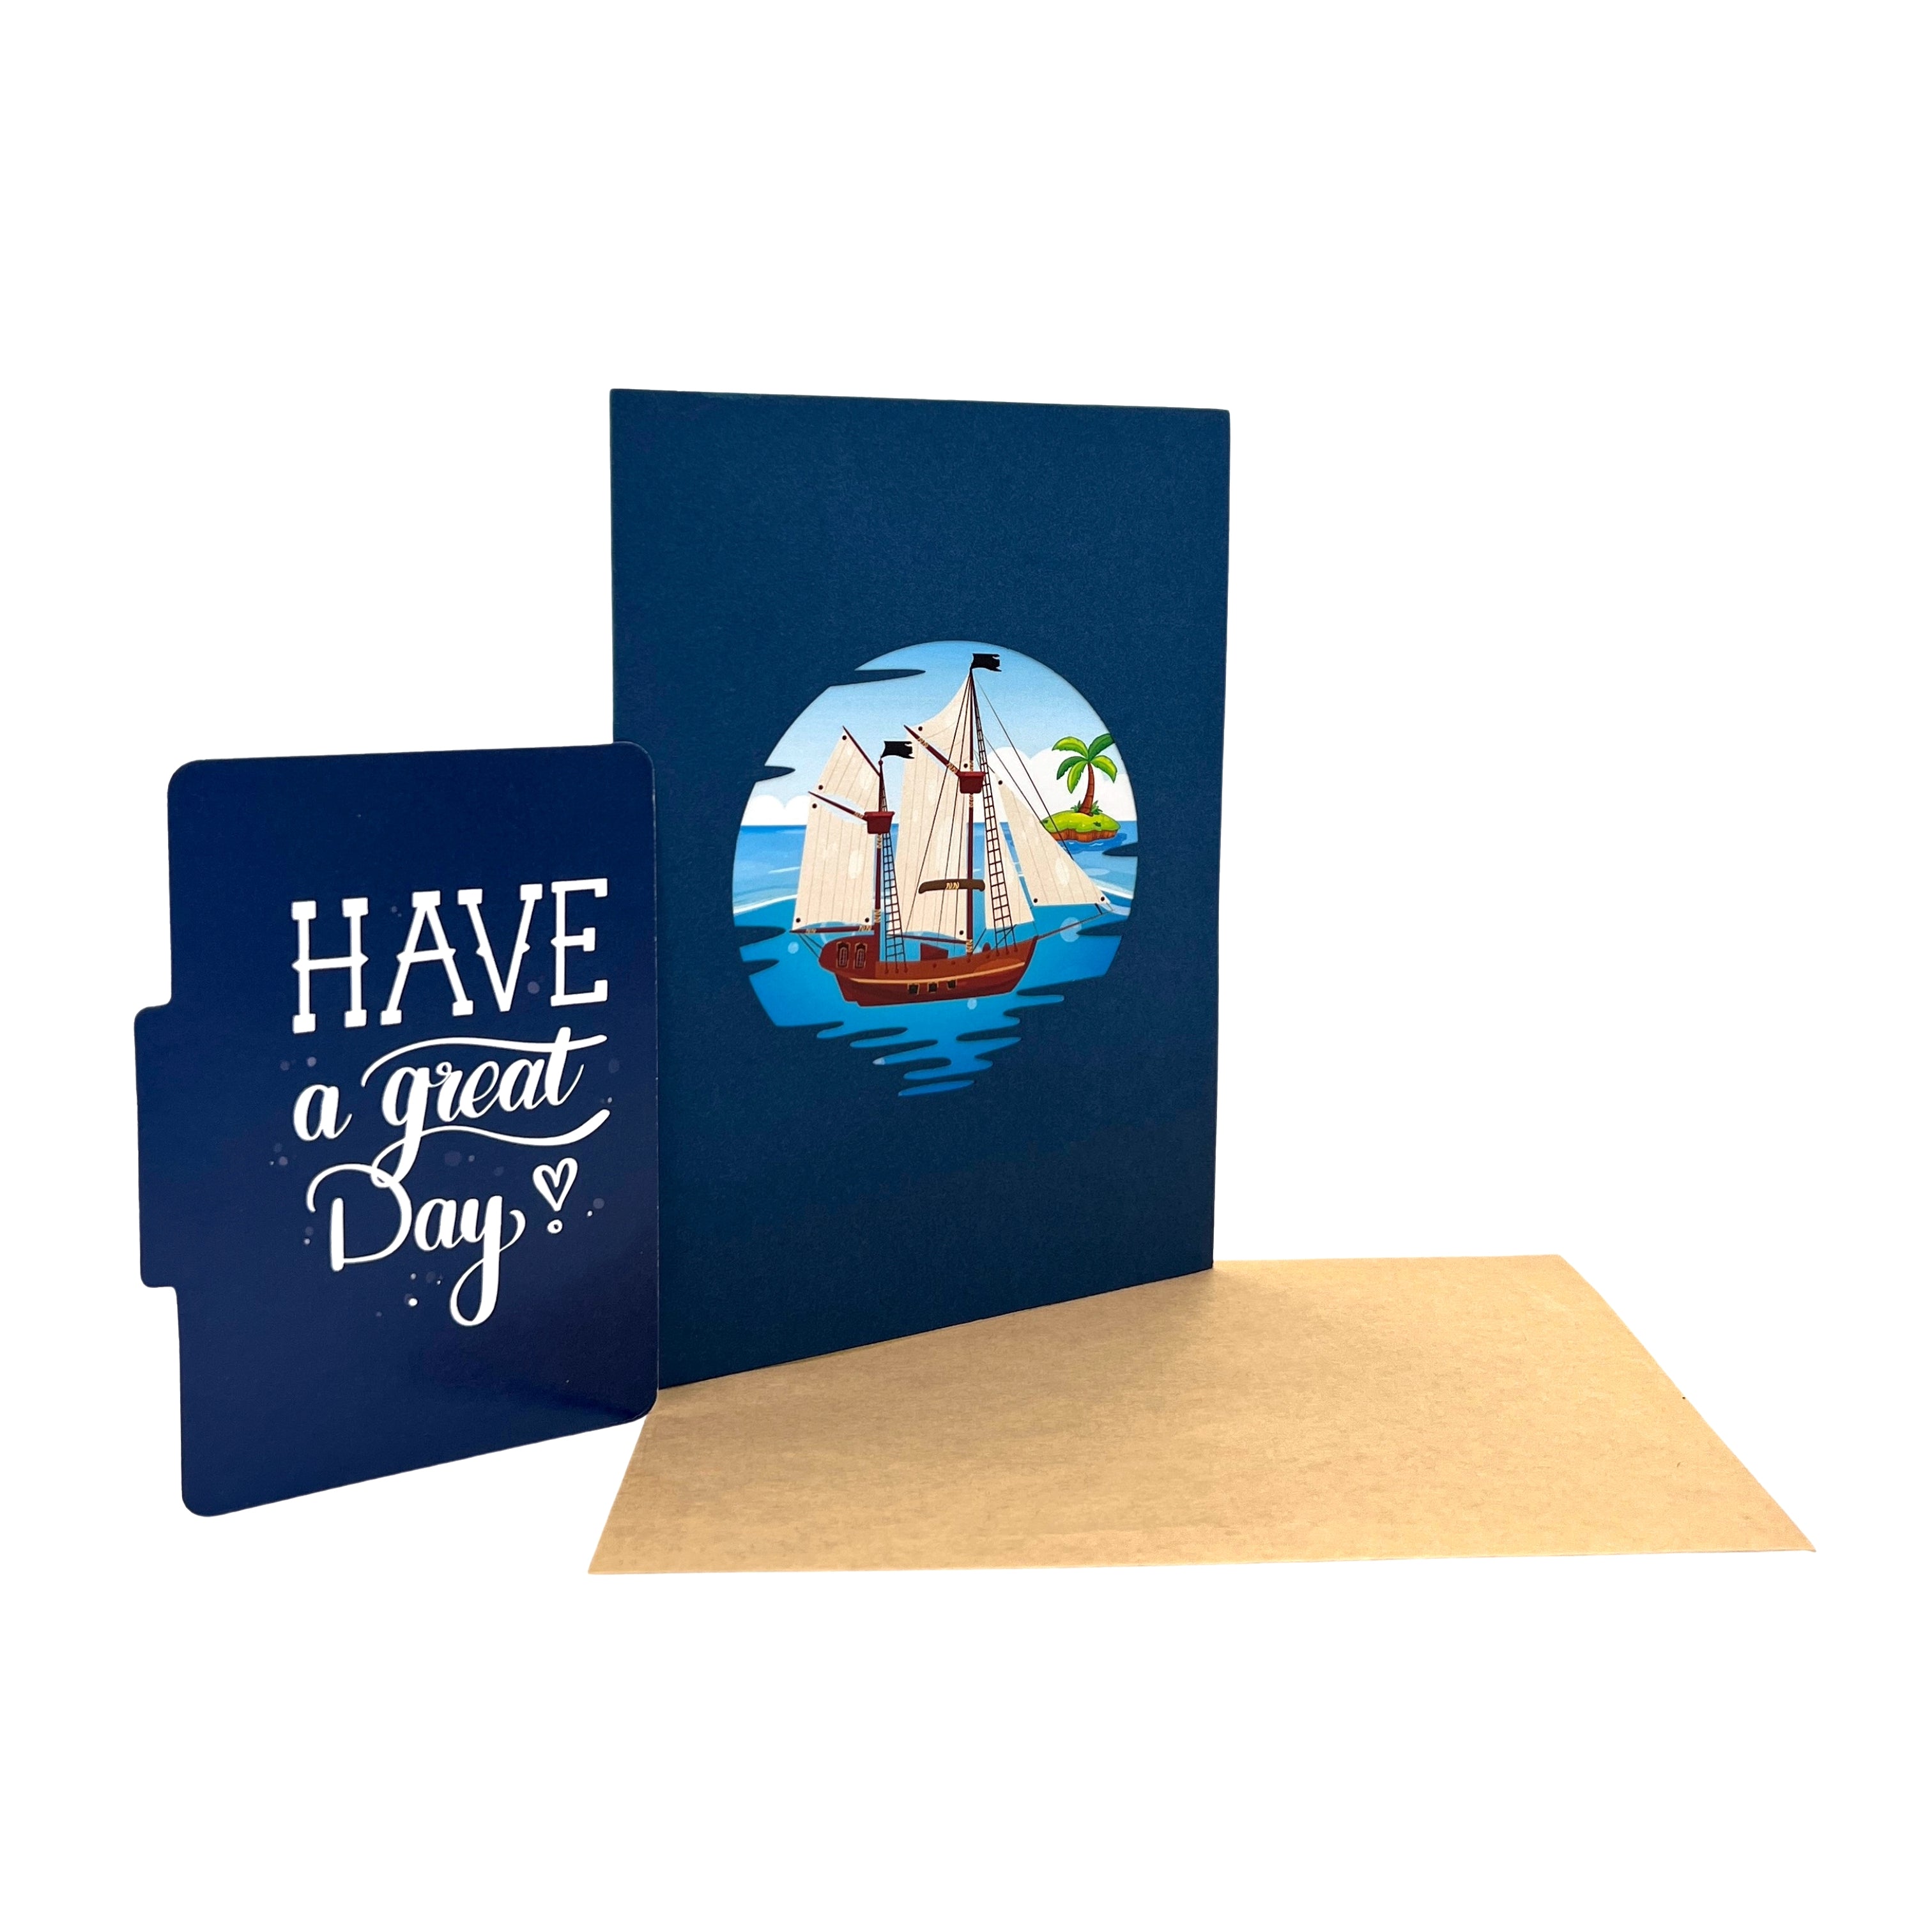 Pop Up Greeting Card The Pirate Ship Adventure Sailing Voyage Boat Cartoon Kid Card Birthday Thank You Card Gift for Children Kid Teenager